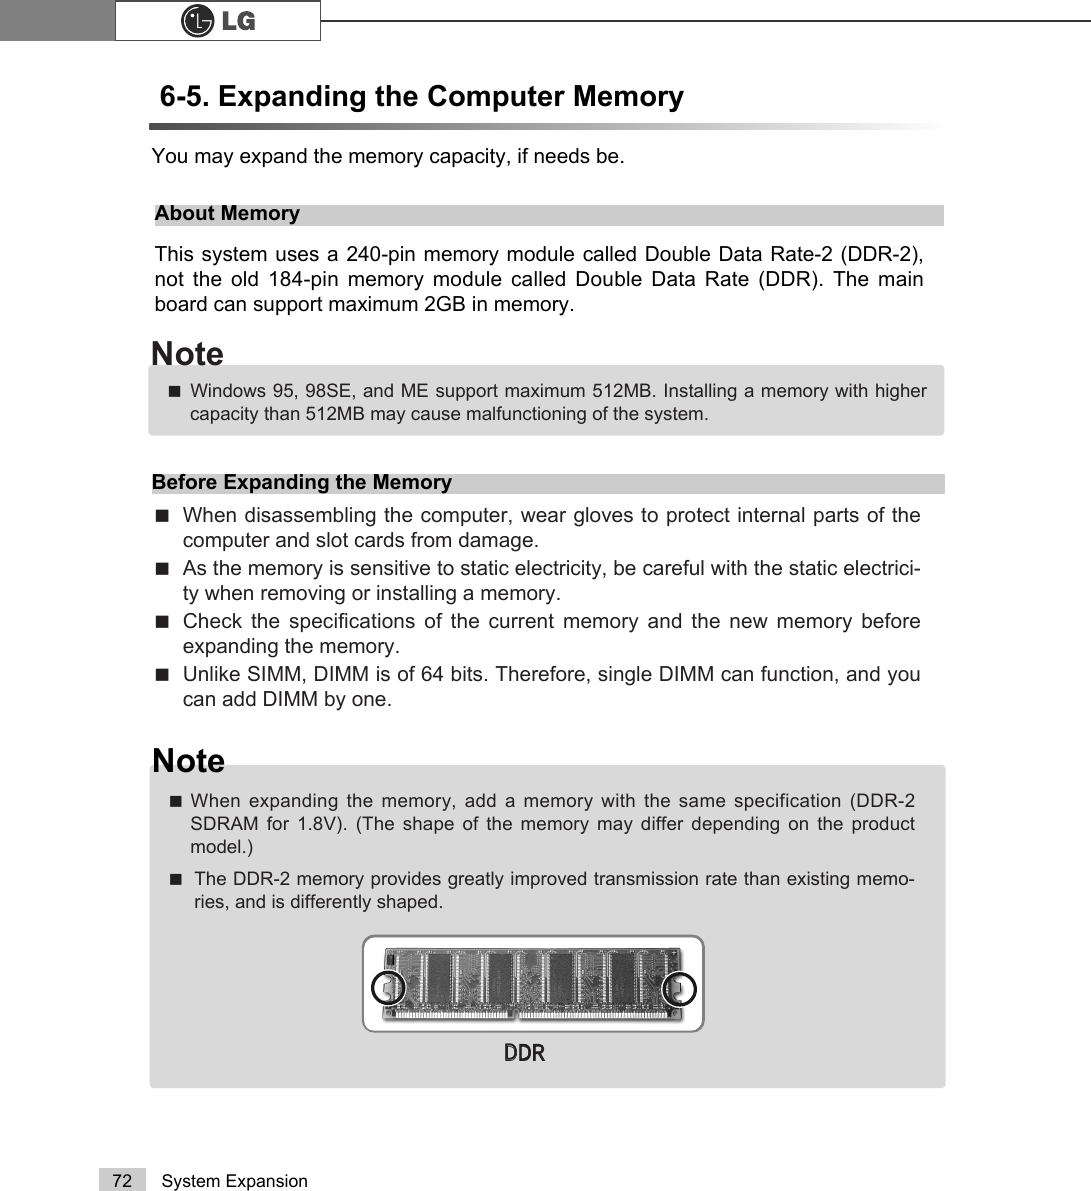 72 System Expansion6-5. Expanding the Computer Memory You may expand the memory capacity, if needs be.About MemoryThis system uses a 240-pin memory module called Double Data Rate-2 (DDR-2),not the old 184-pin memory module called Double Data Rate (DDR). The mainboard can support maximum 2GB in memory.Before Expanding the MemoryãWhen disassembling the computer, wear gloves to protect internal parts of thecomputer and slot cards from damage.ãAs the memory is sensitive to static electricity, be careful with the static electrici-ty when removing or installing a memory.ãCheck the specifications of the current memory and the new memory beforeexpanding the memory.ãUnlike SIMM, DIMM is of 64 bits. Therefore, single DIMM can function, and youcan add DIMM by one.ãWindows 95, 98SE, and ME support maximum 512MB. Installing a memory with highercapacity than 512MB may cause malfunctioning of the system.NoteNoteãWhen expanding the memory, add a memory with the same specification (DDR-2SDRAM for 1.8V). (The shape of the memory may differ depending on the productmodel.)ãThe DDR-2 memory provides greatly improved transmission rate than existing memo-ries, and is differently shaped.&apos;&apos;&apos;5